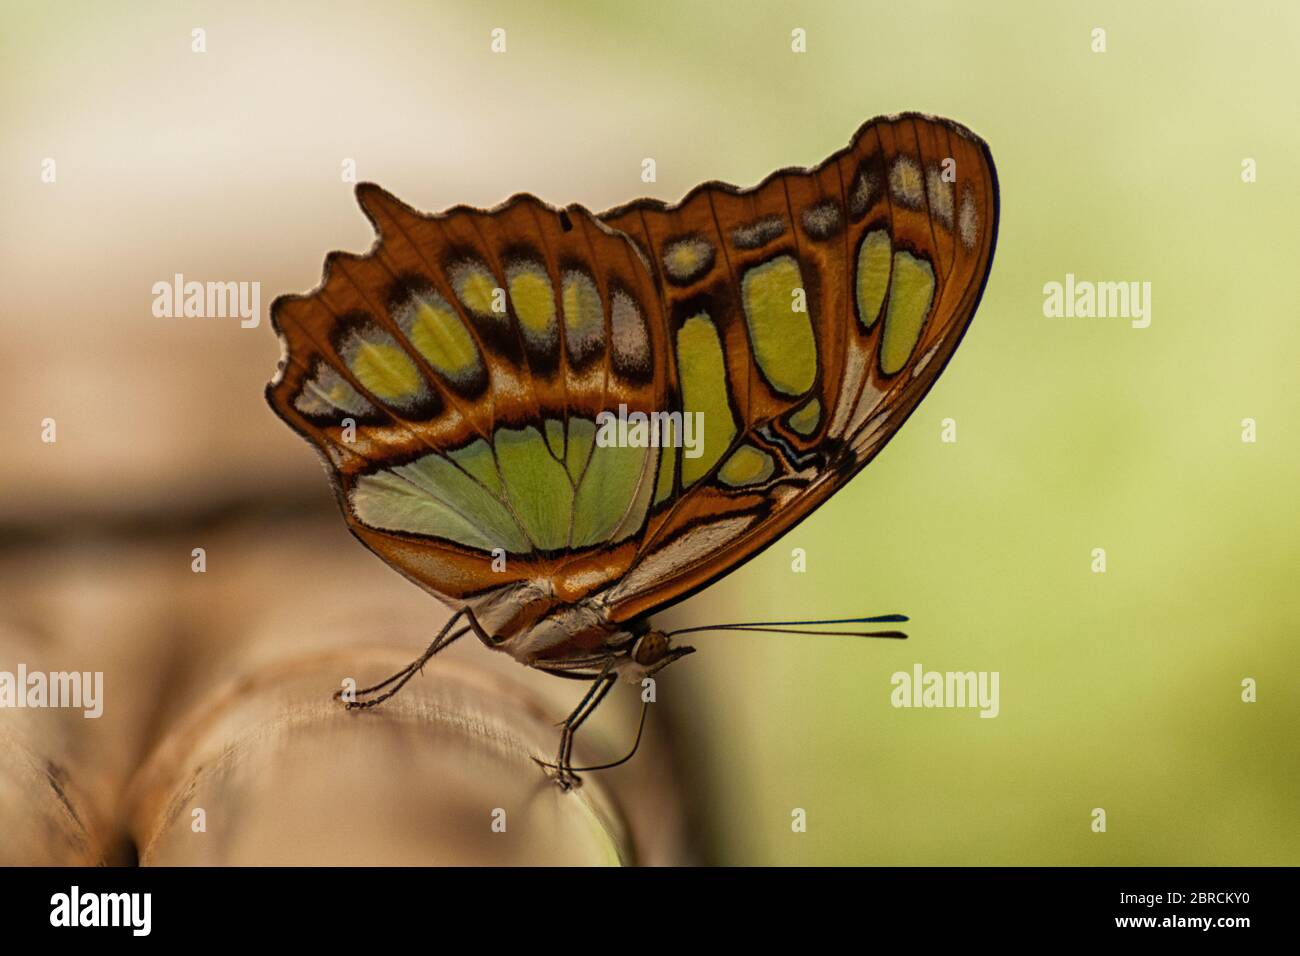 A malachite butterfly on a bamboo Stock Photo